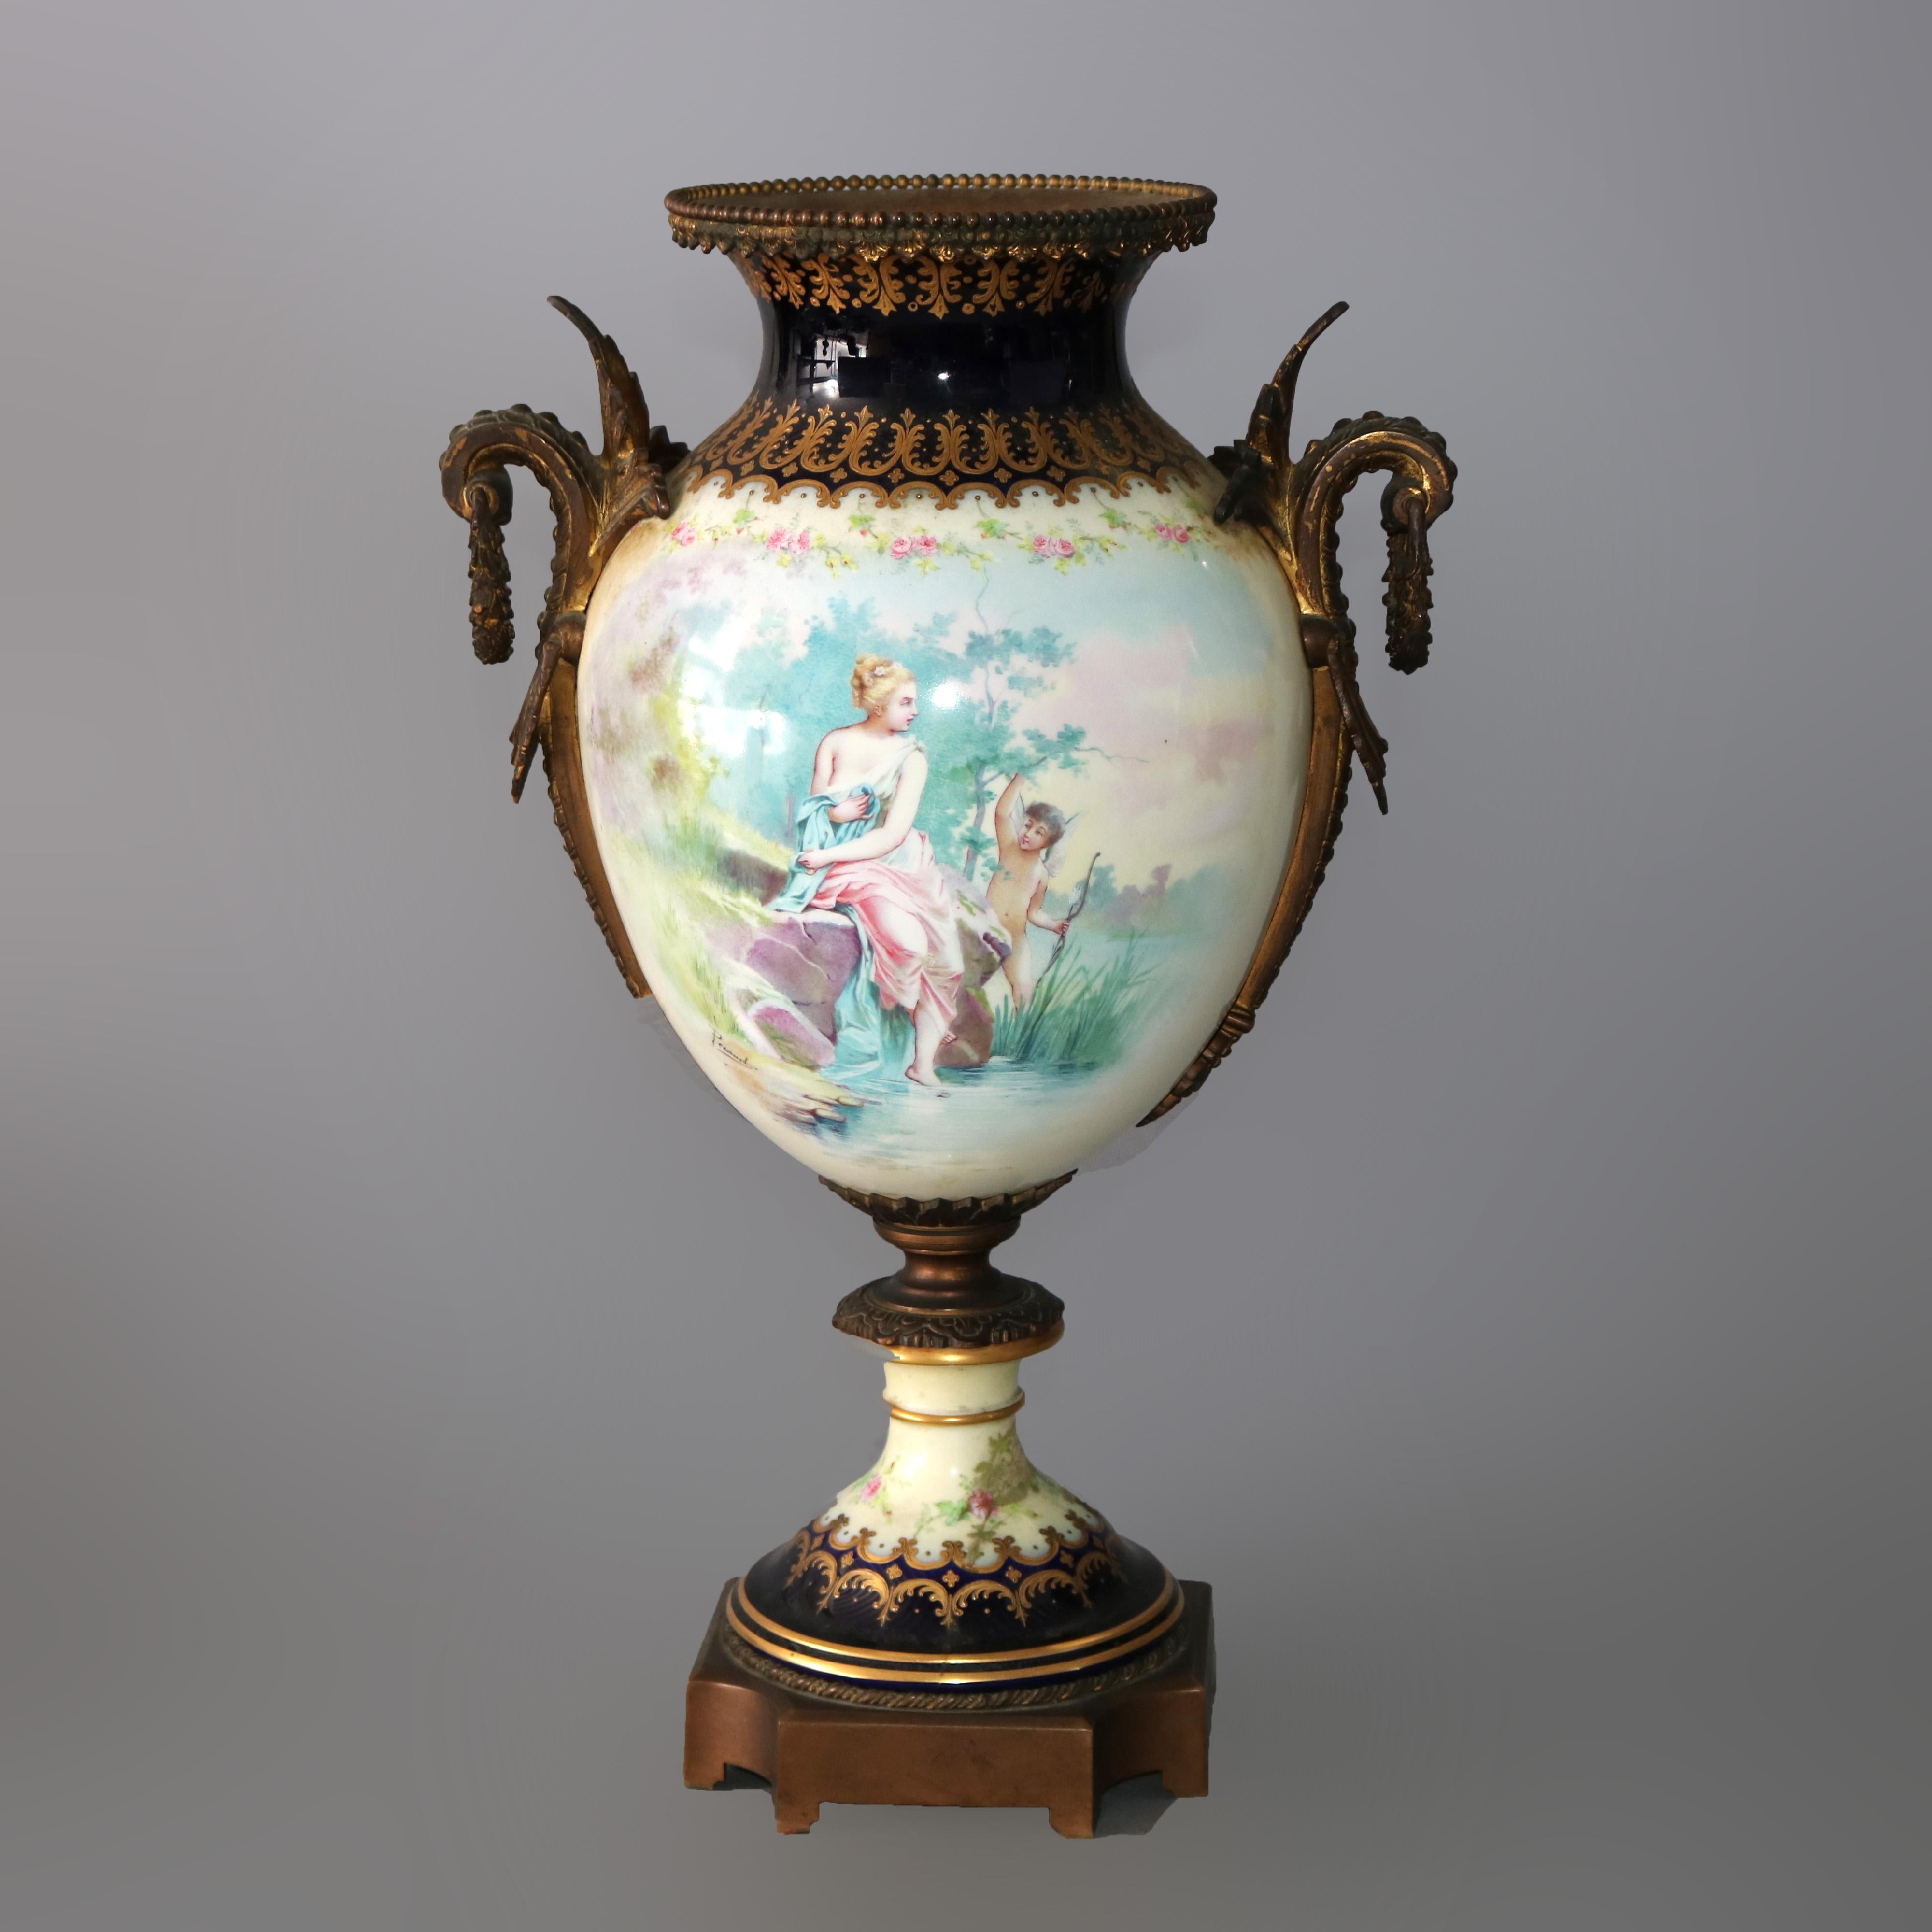 An oversized antique French urn attributed to Sevres offers porcelain construction with an artist signed hand painted reserves by Pesaud depicting a woman and Cupid in countryside setting on vessel with cobalt blue banding, foliate cast bronze